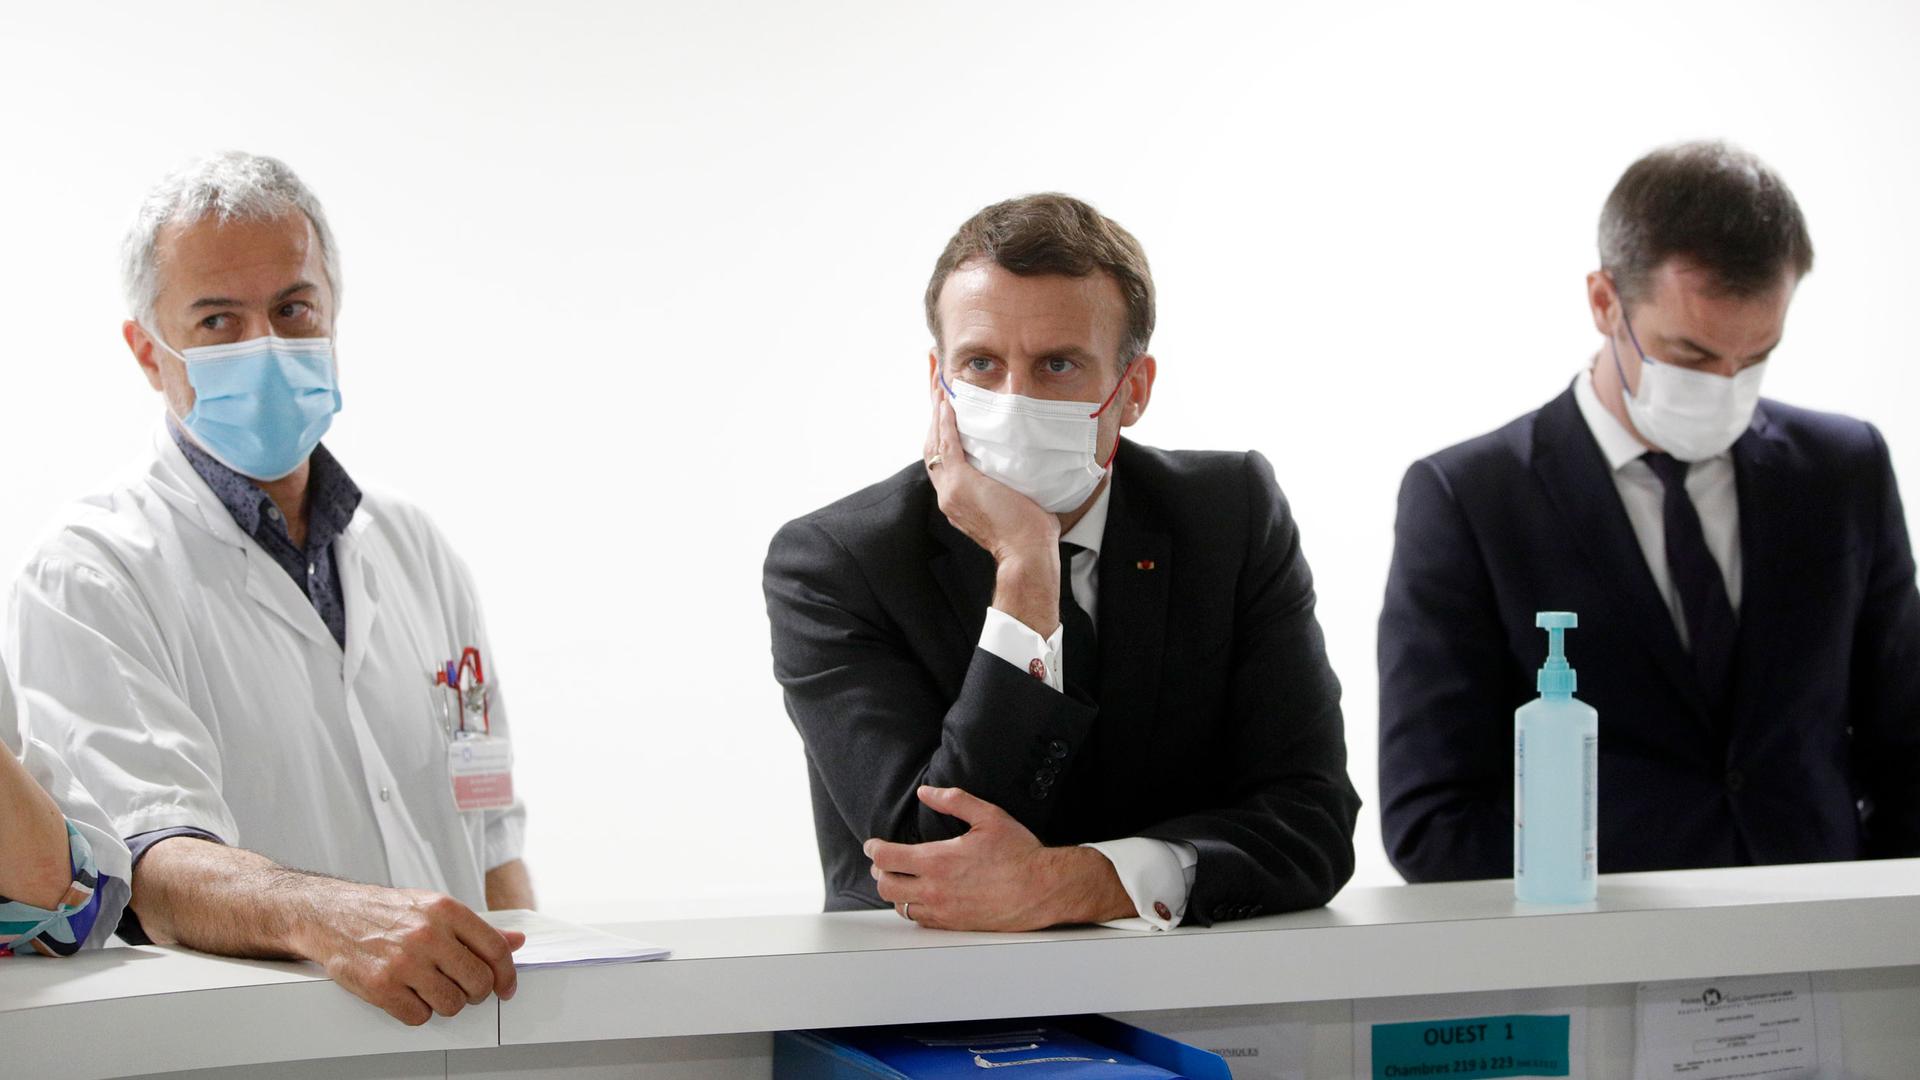 French President Emmanuel Macron is shown wearing a dark suit and white face mask while flanked by other officials.